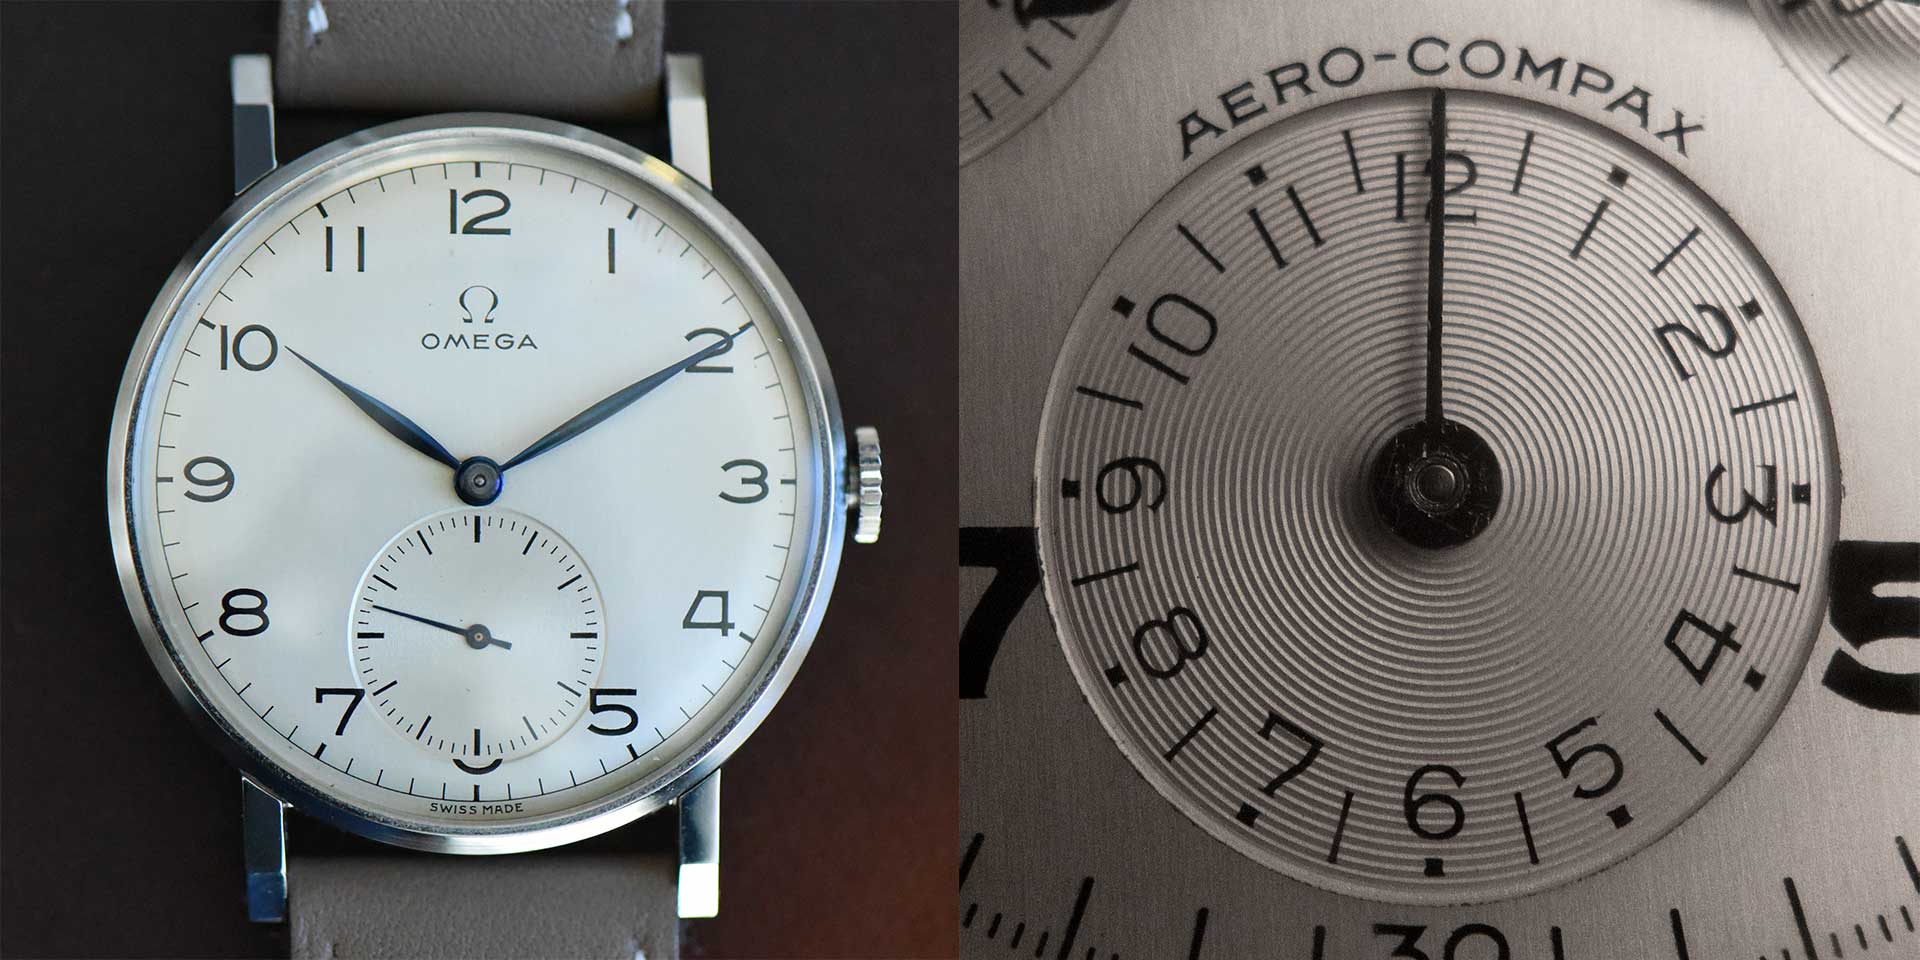 Two watch dials: Omega 30T2 and Universal Geneve Aero-Compax watch dials